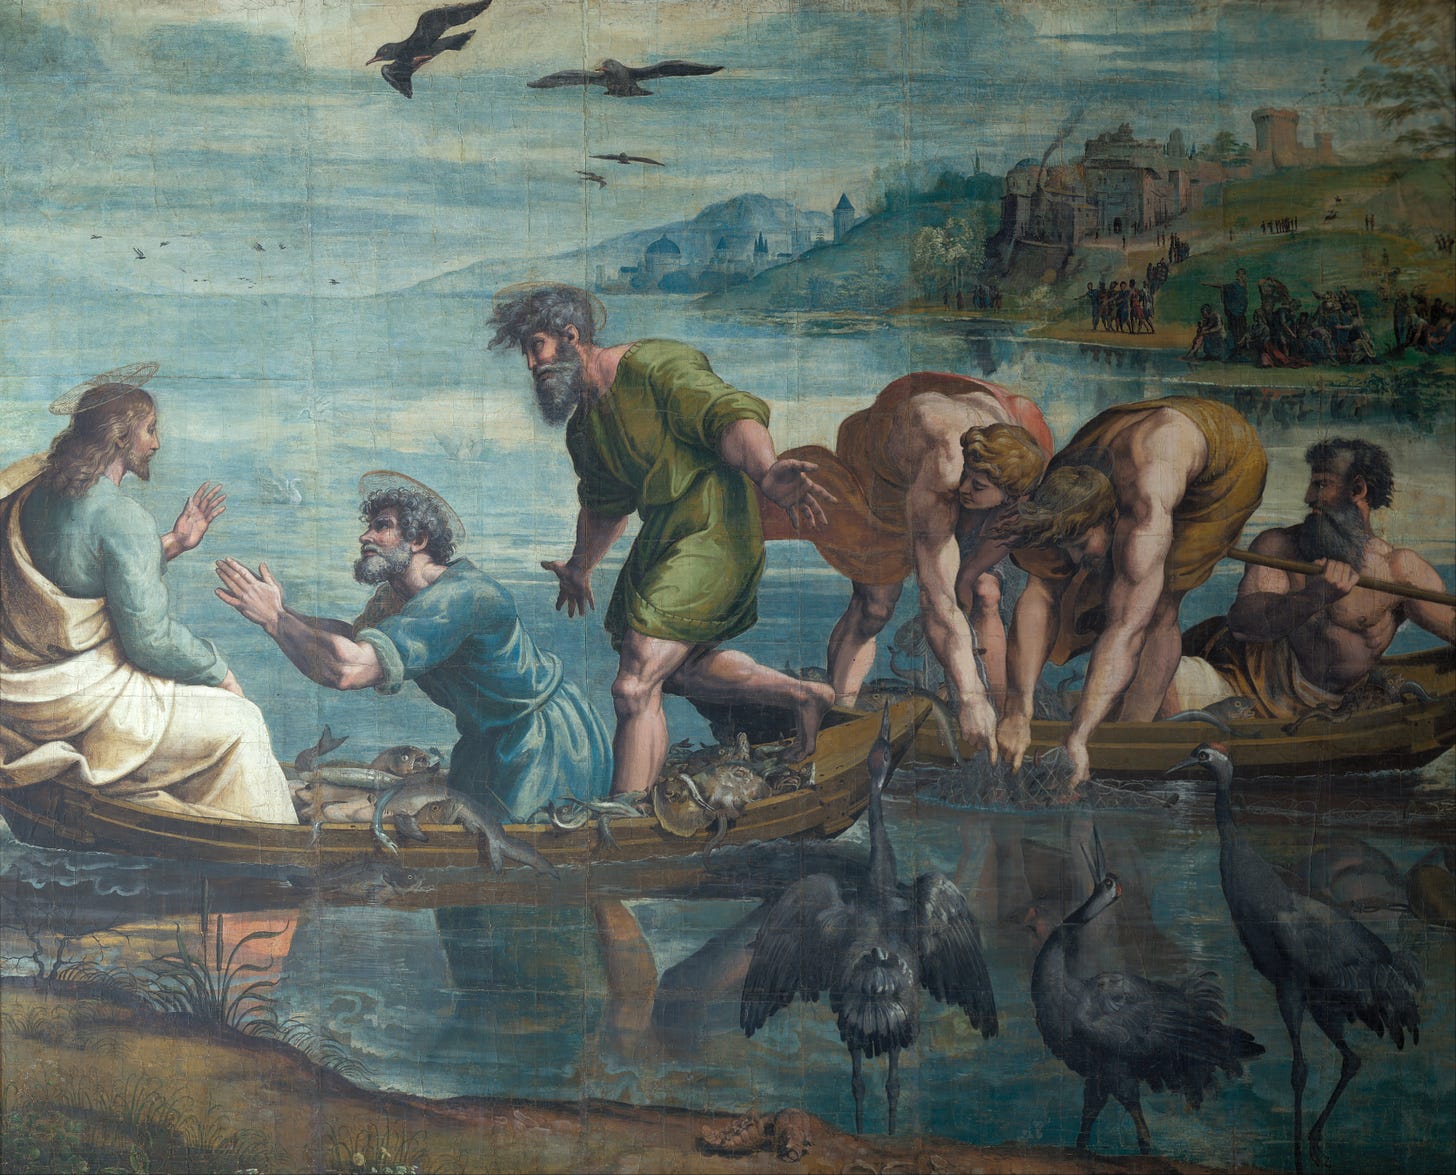 Image of Raphael's cartoon painting titled: "The Miraculous Draught of Fishes